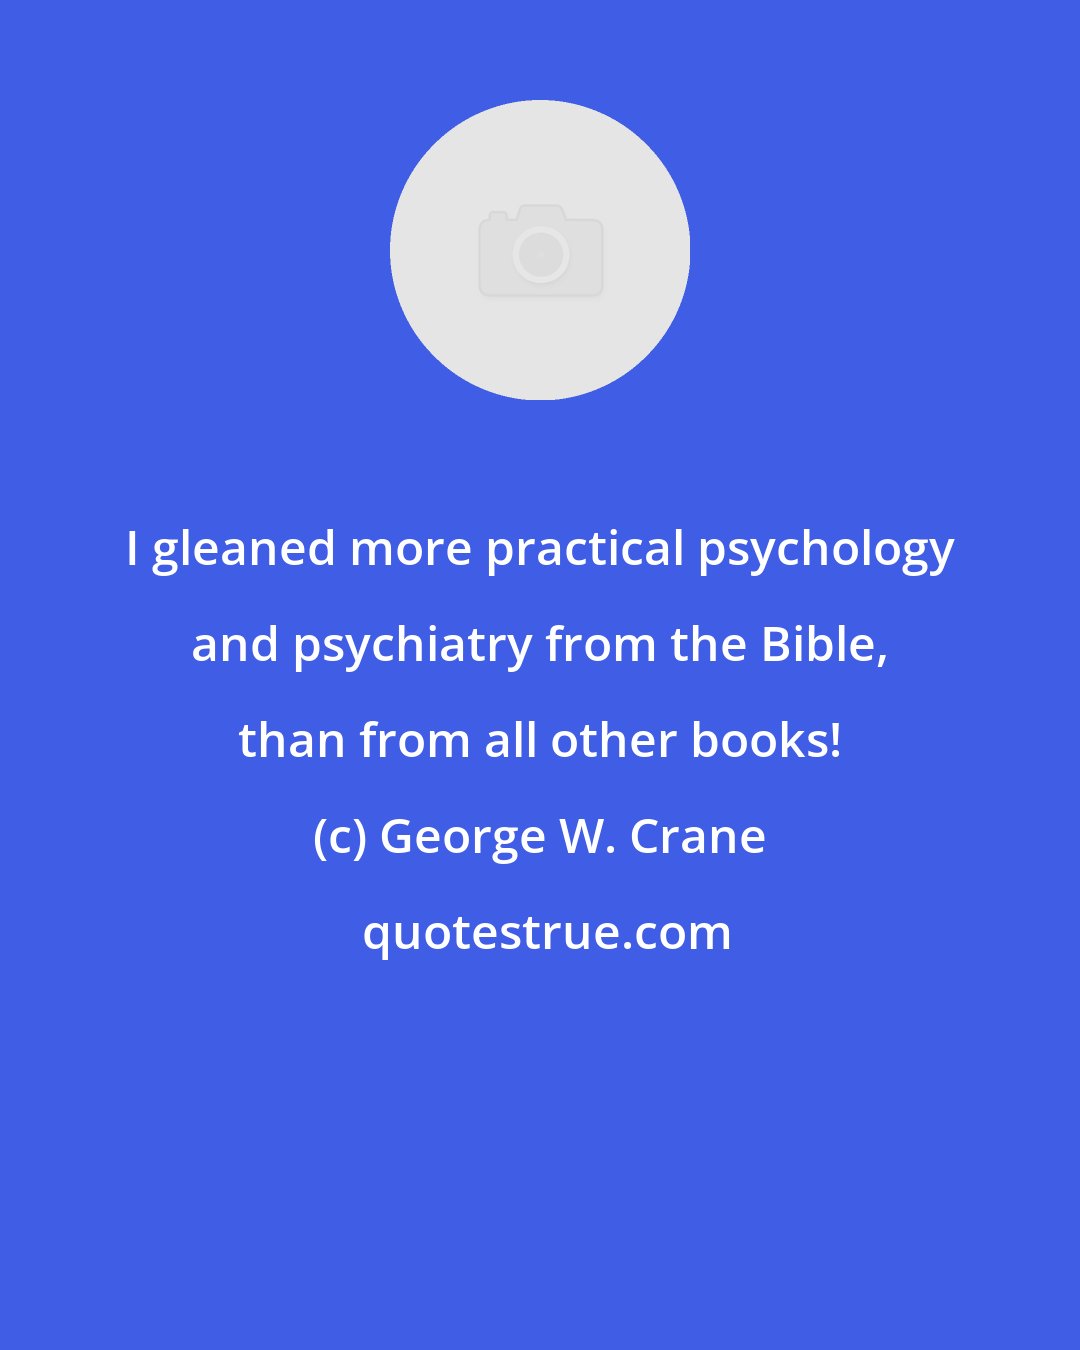 George W. Crane: I gleaned more practical psychology and psychiatry from the Bible, than from all other books!